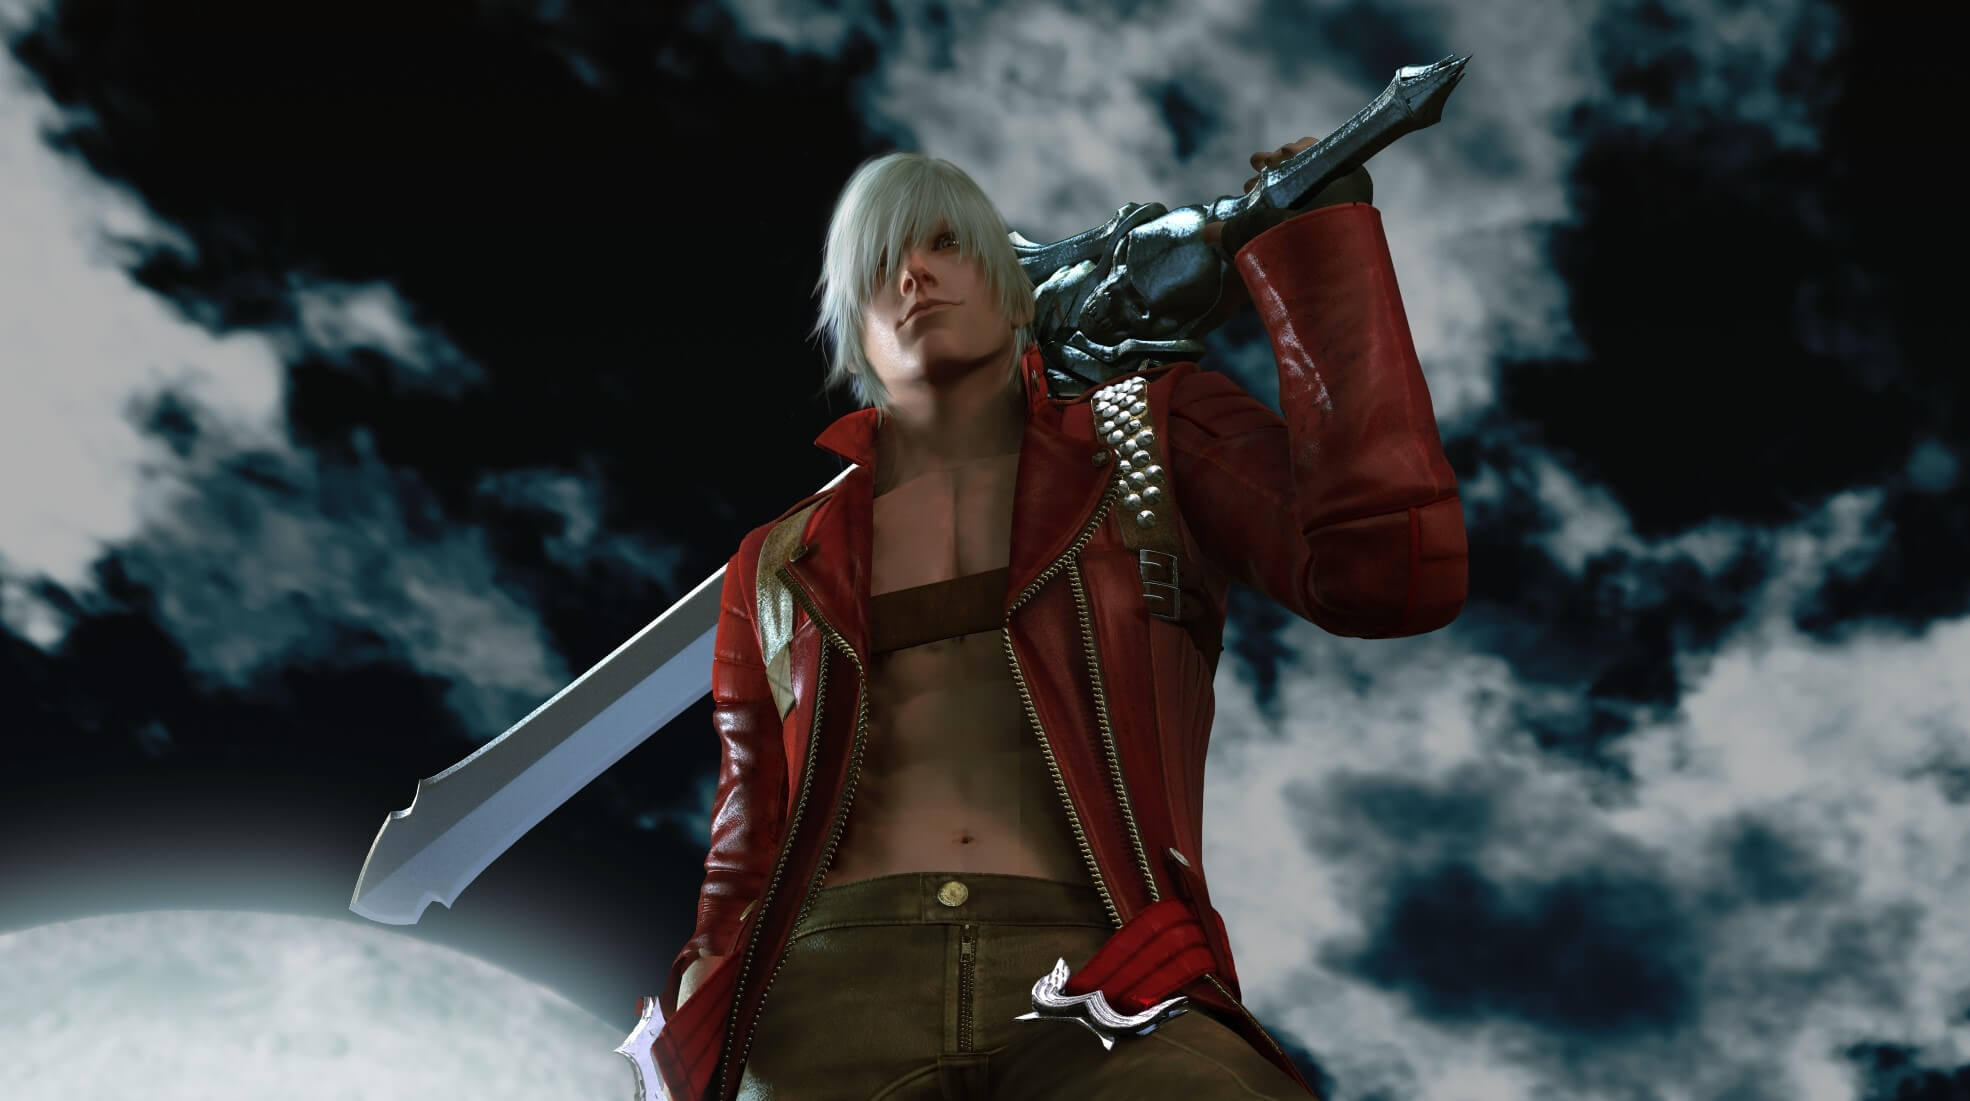 This 3.5GB HD Texture Pack for Devil May Cry 3 upscales all of its